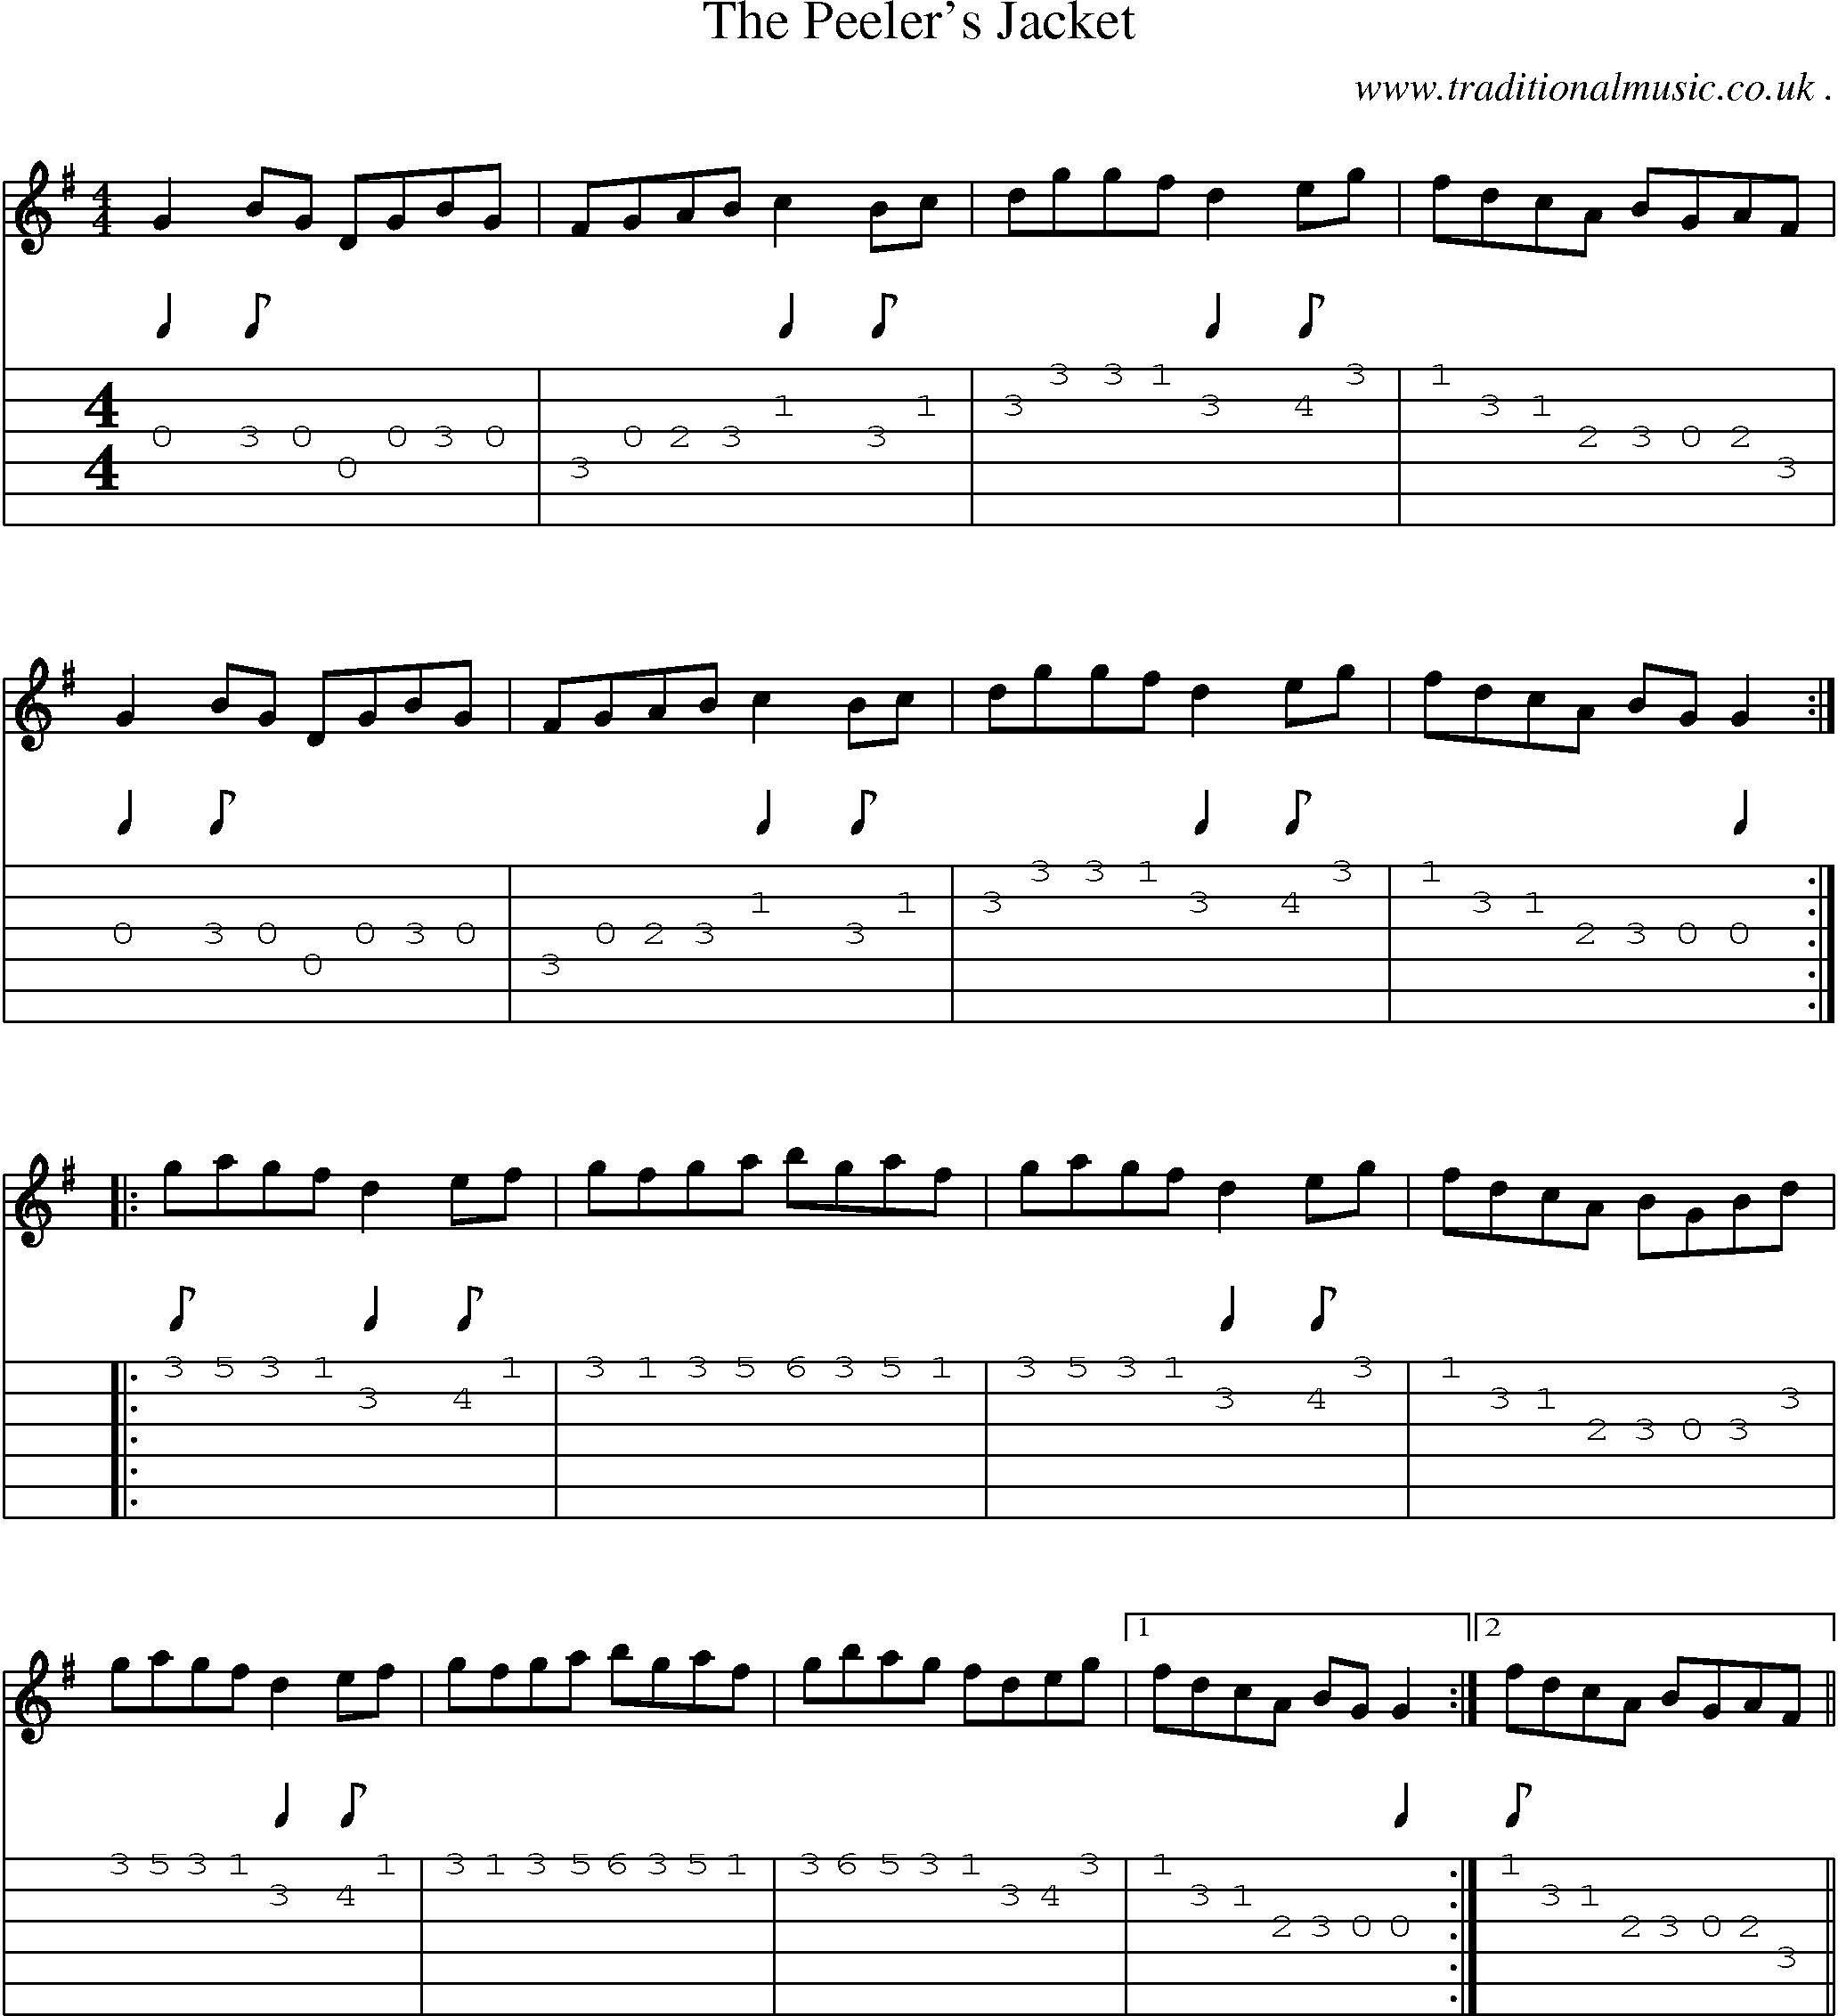 Sheet-Music and Guitar Tabs for The Peelers Jacket